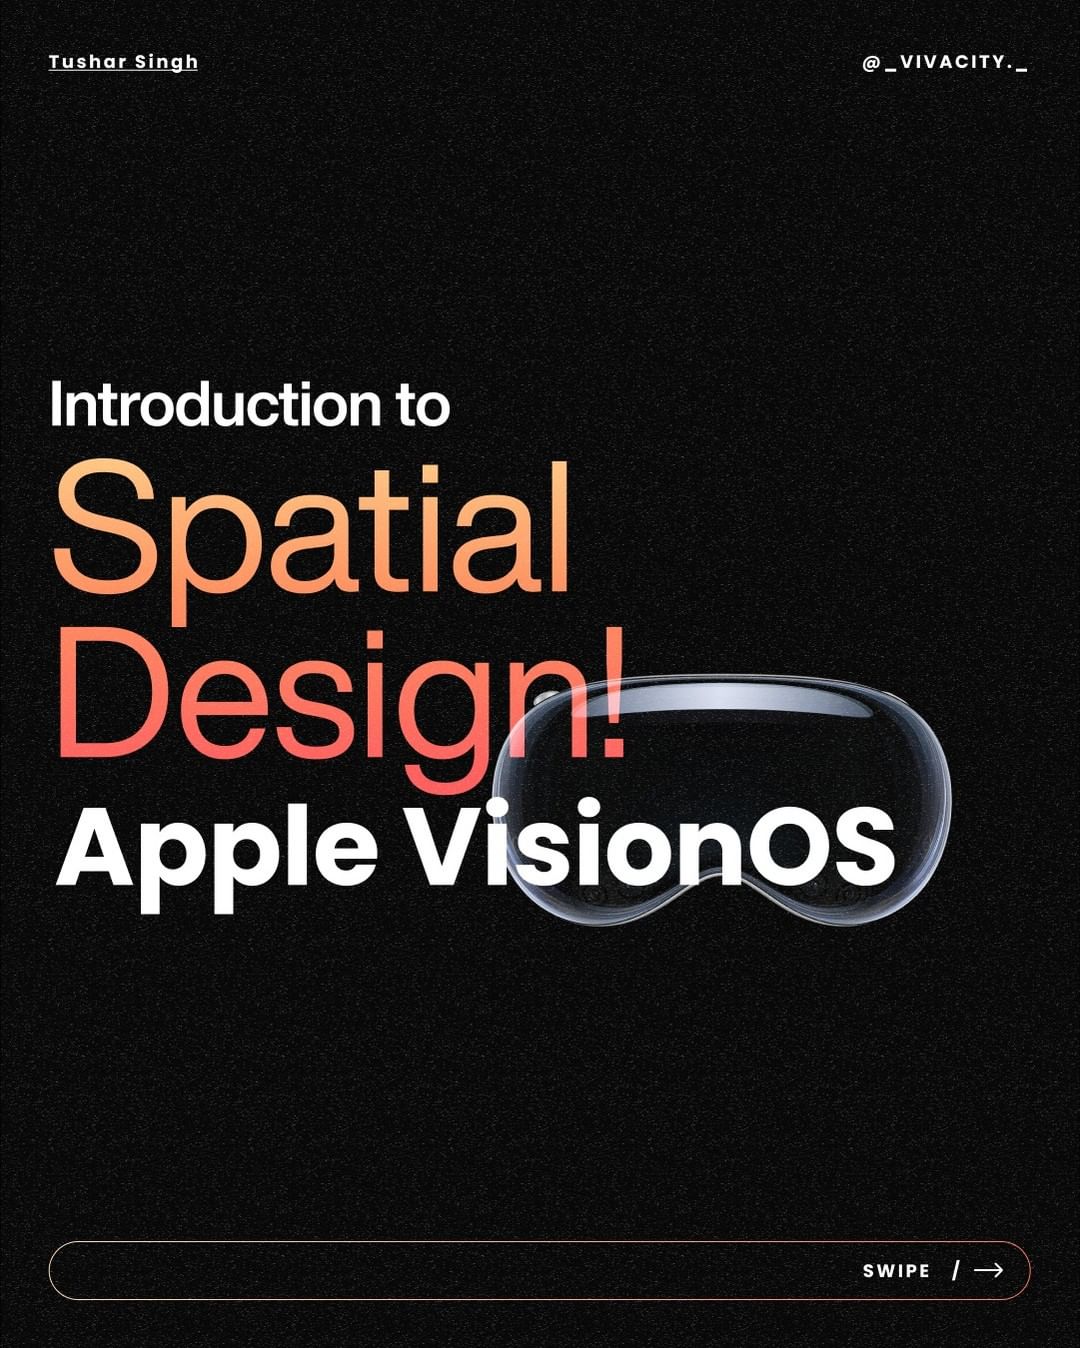 Spatial Design Apple Vision OS - Applications and Future-436029597_1023792519249235_1875138892014214394_n 